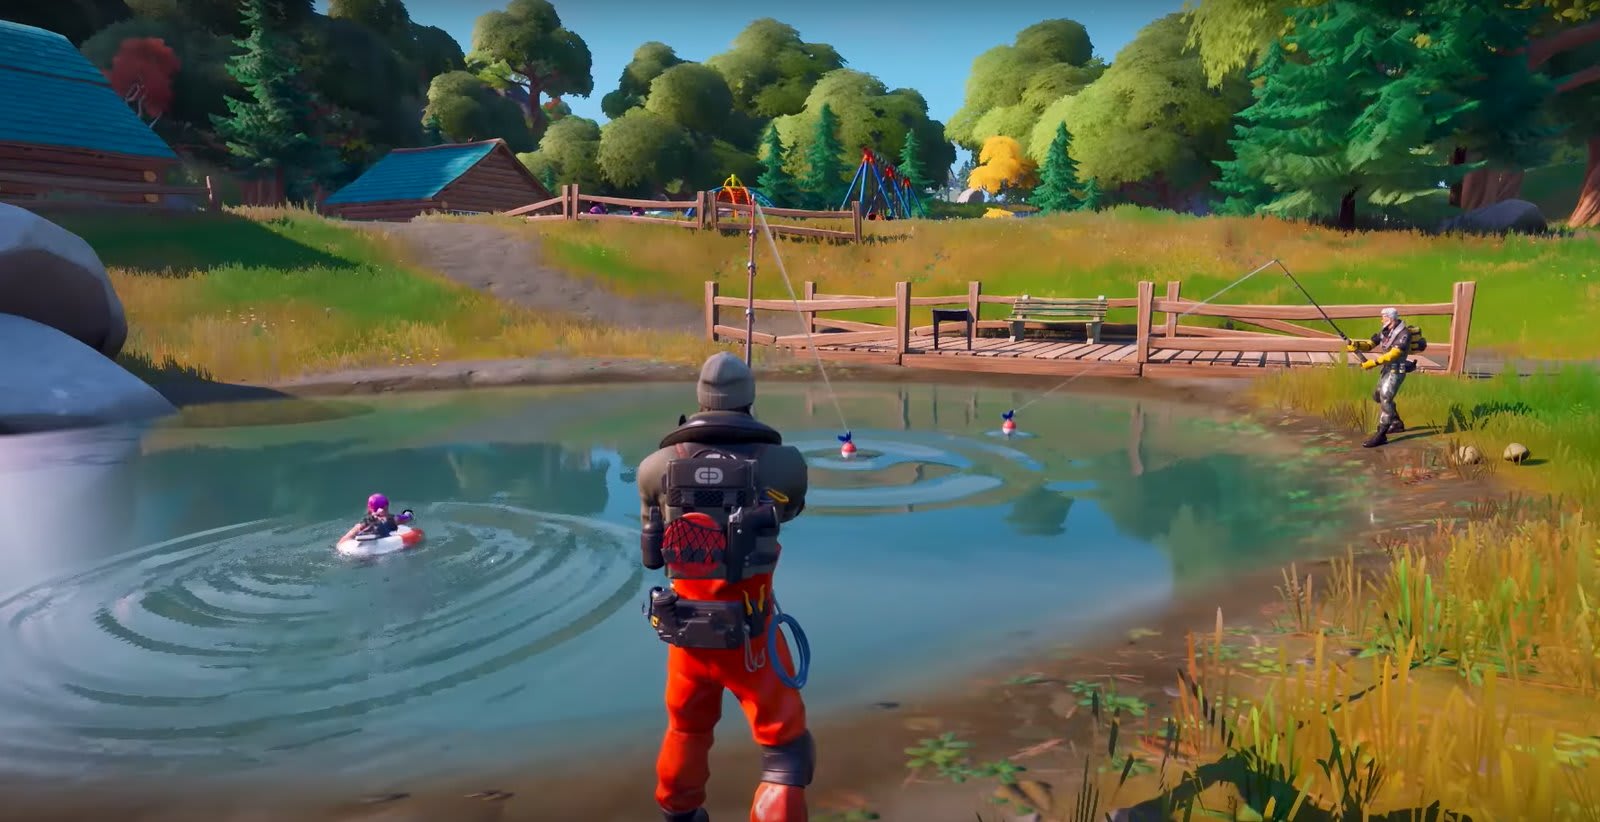 Leaked Fortnite Chapter 2 Trailer Showcases A New Map And Boats